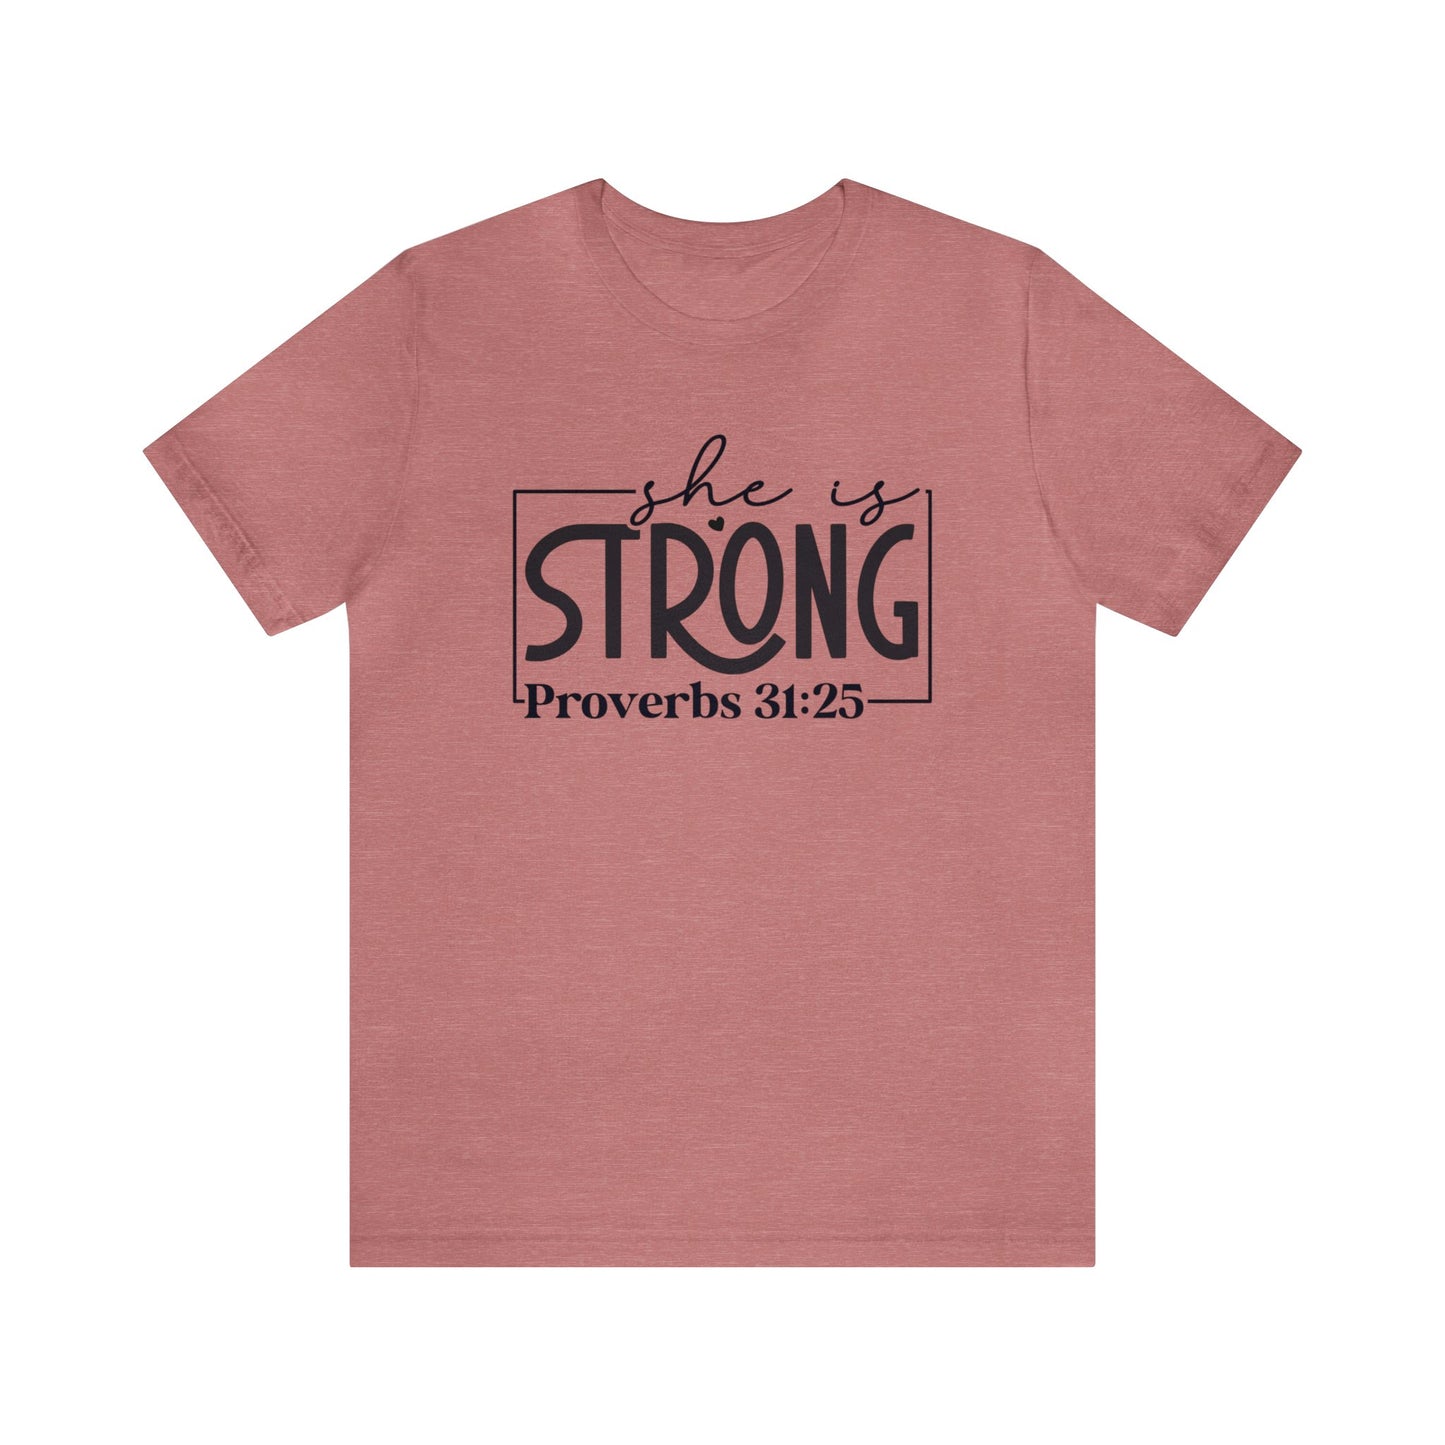 She is Strong Women's Short Sleeve Tee